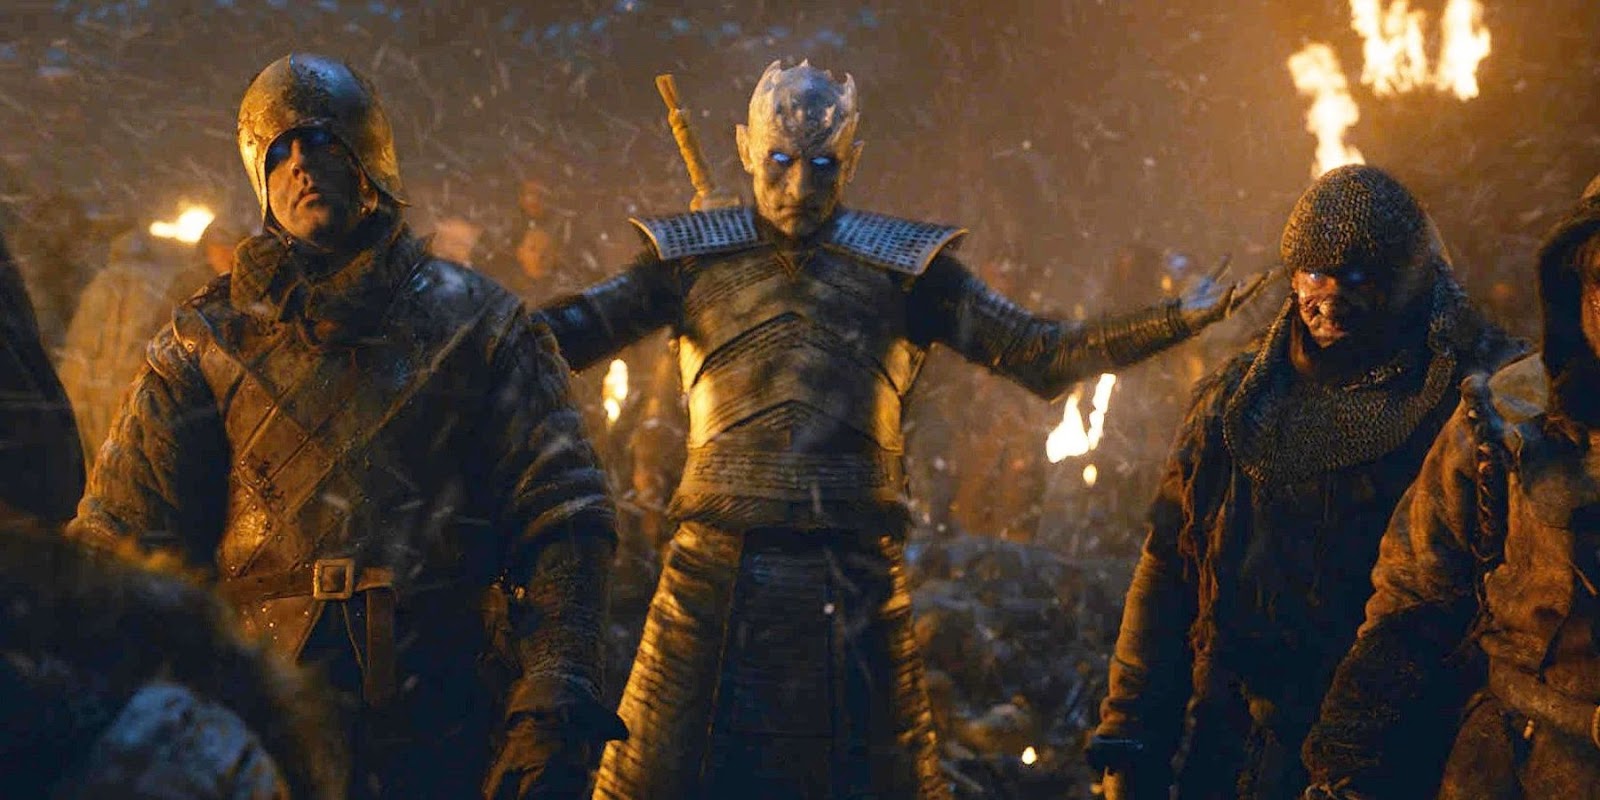 The Night King in the third episode of Game of Thrones season eight, Battle of Winterfell